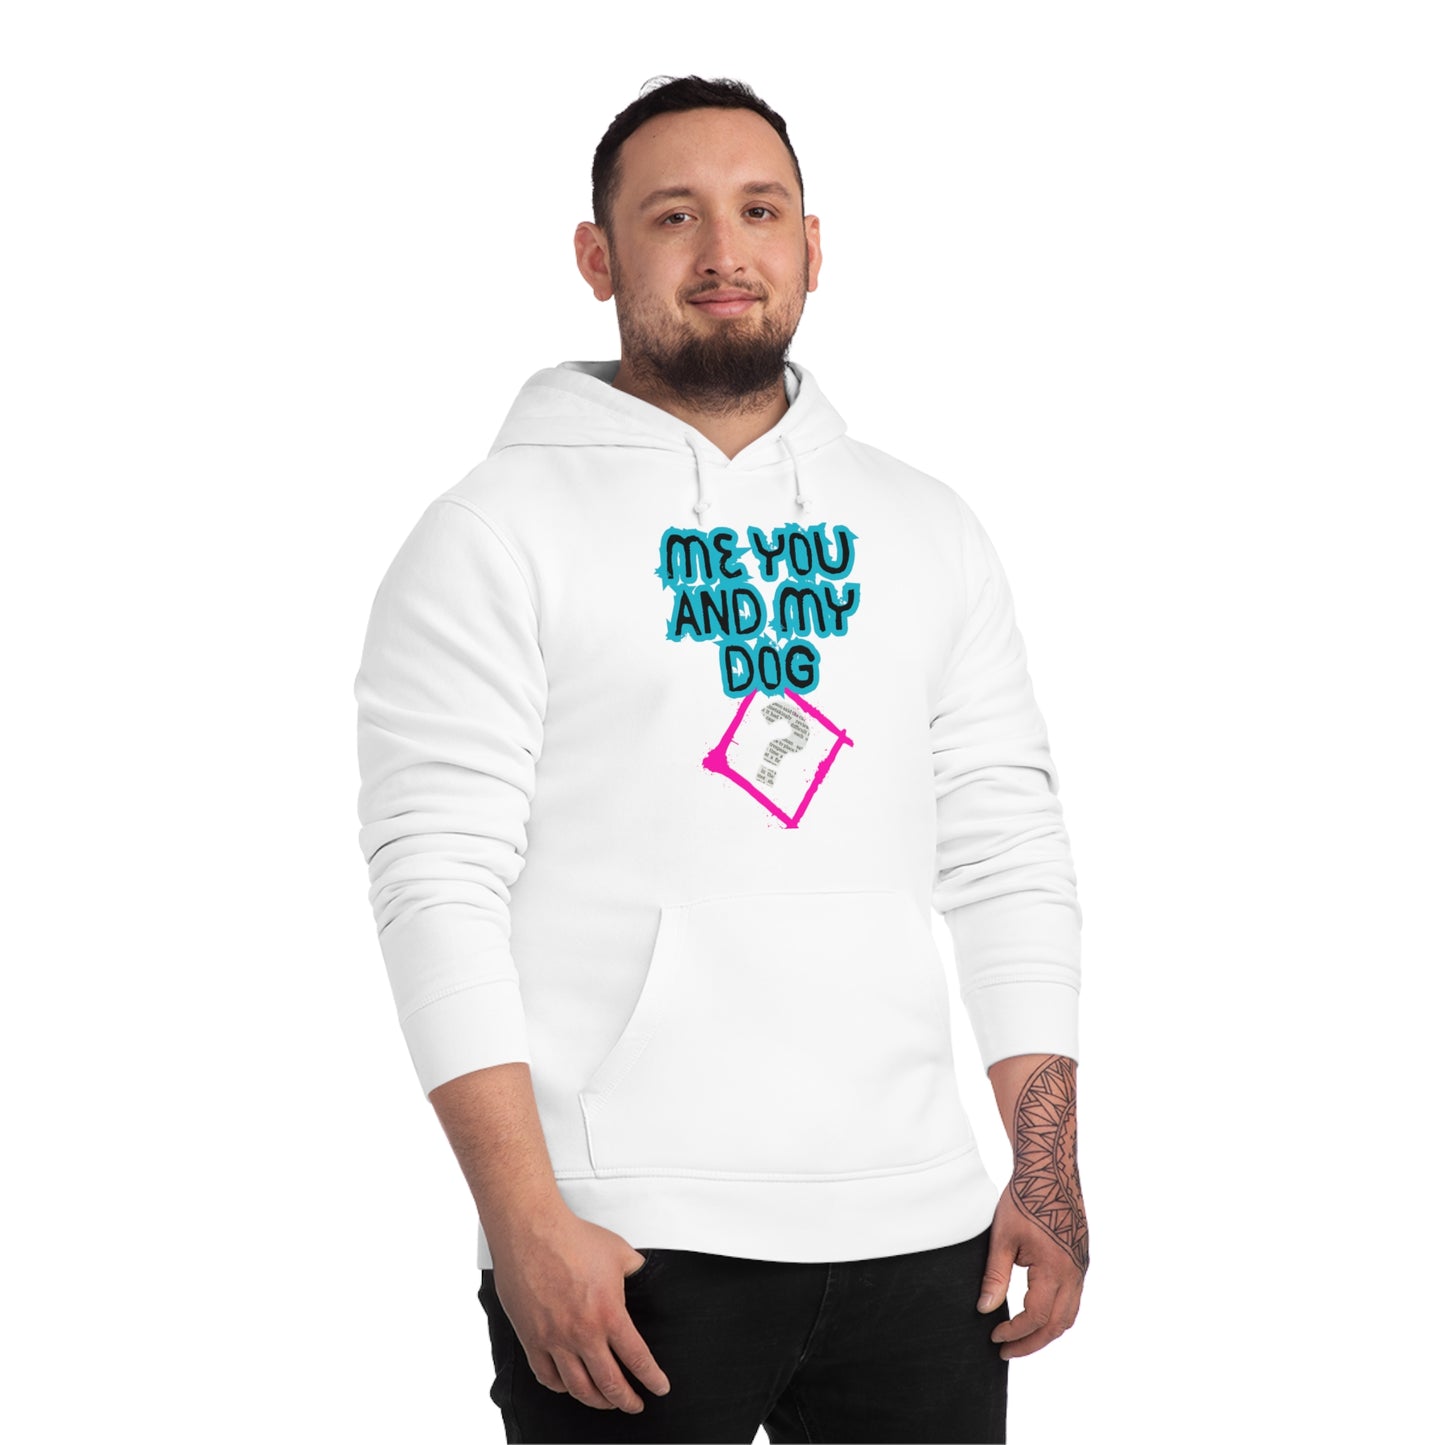 SniffwaggleNwalk™ "Me You And The Dog?" Unisex Drummer Hoodie